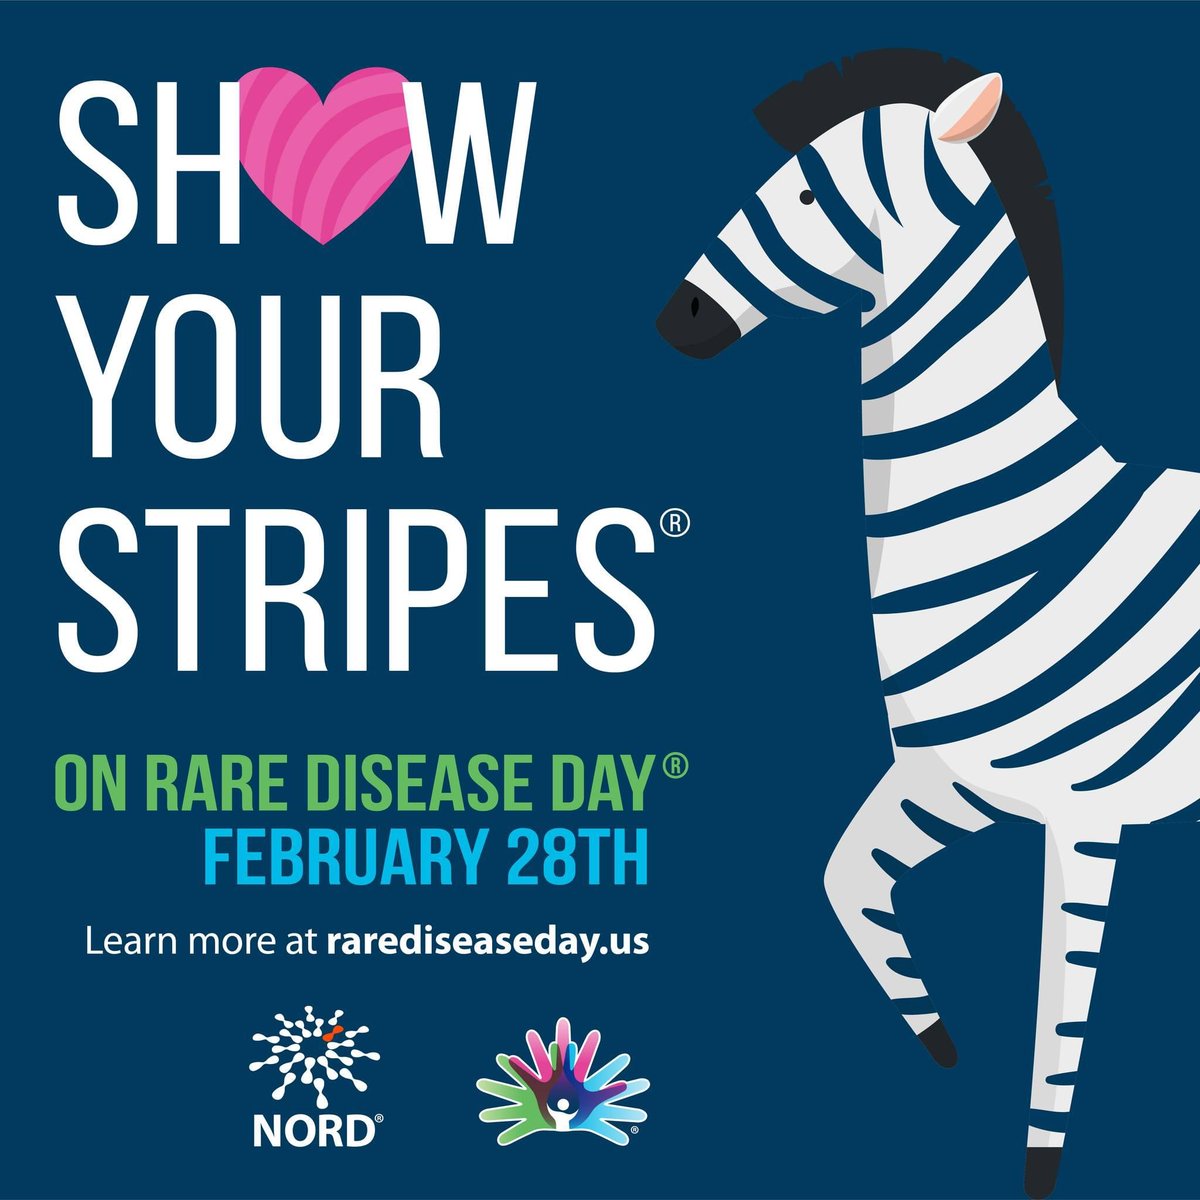 We support all those who are Rare. You may be unique but are never alone! @PPHNet @PHAssociation @phaware @KidsAtColumbia @ColumbiaMed @ushask01 @DunbarIvy @SteveAbman @DrMarthaGulati #pht